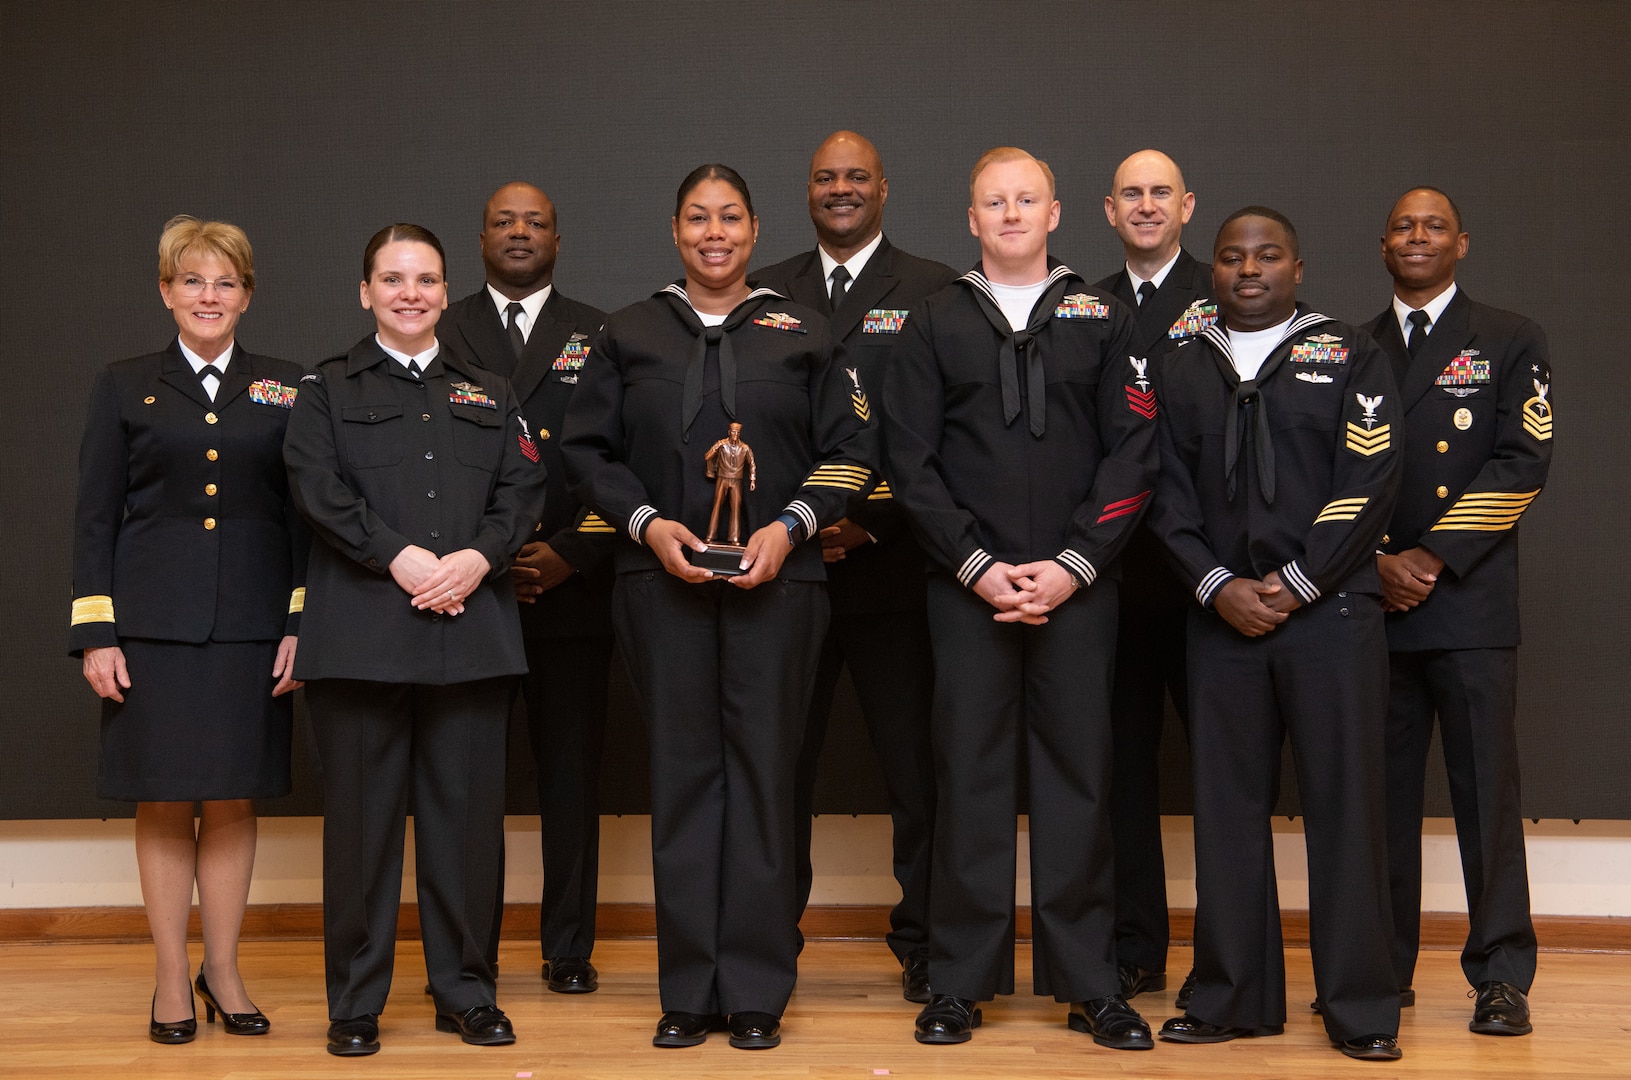 230406-N-DQ752-0034 SAN ANTONIO, Texas (Apr. 6, 2023) Rear Adm. Cynthia A. Kuehner, commander Naval Medical Forces Support Command (NMFSC) poses with the NMFSC 2023 Sailor of the Year awardee and nominees with their senior enlisted leaders after a ceremony April 6. (U.S. Navy Photo by Mass Communication Specialist 2nd Class Cheyenne Geletka)